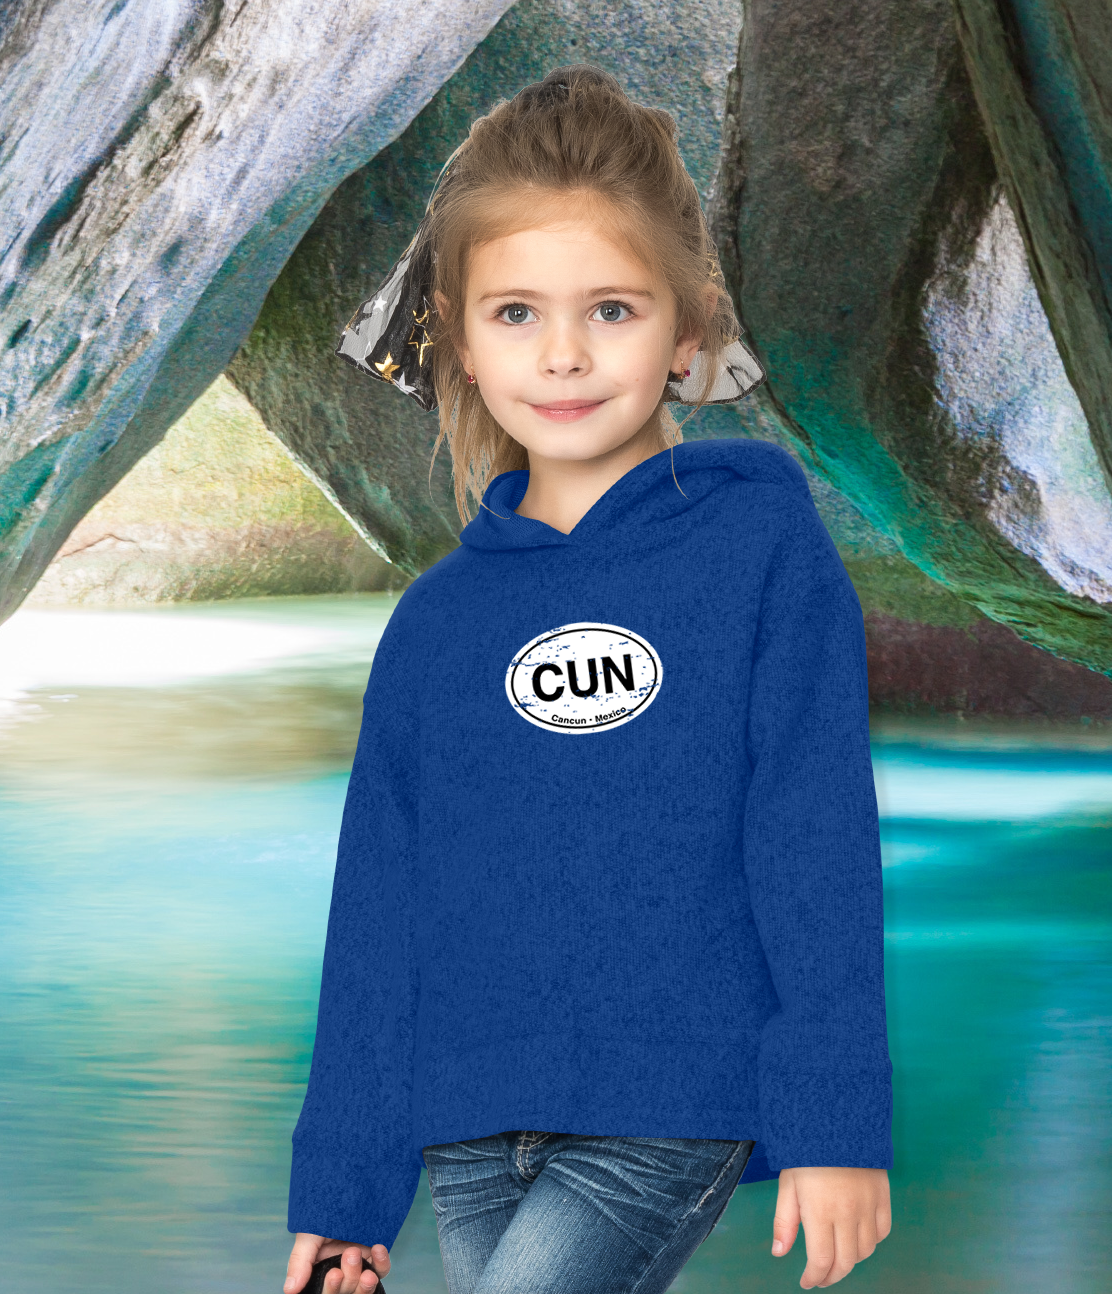 Cancun Classic Youth Hoodie - My Destination Location